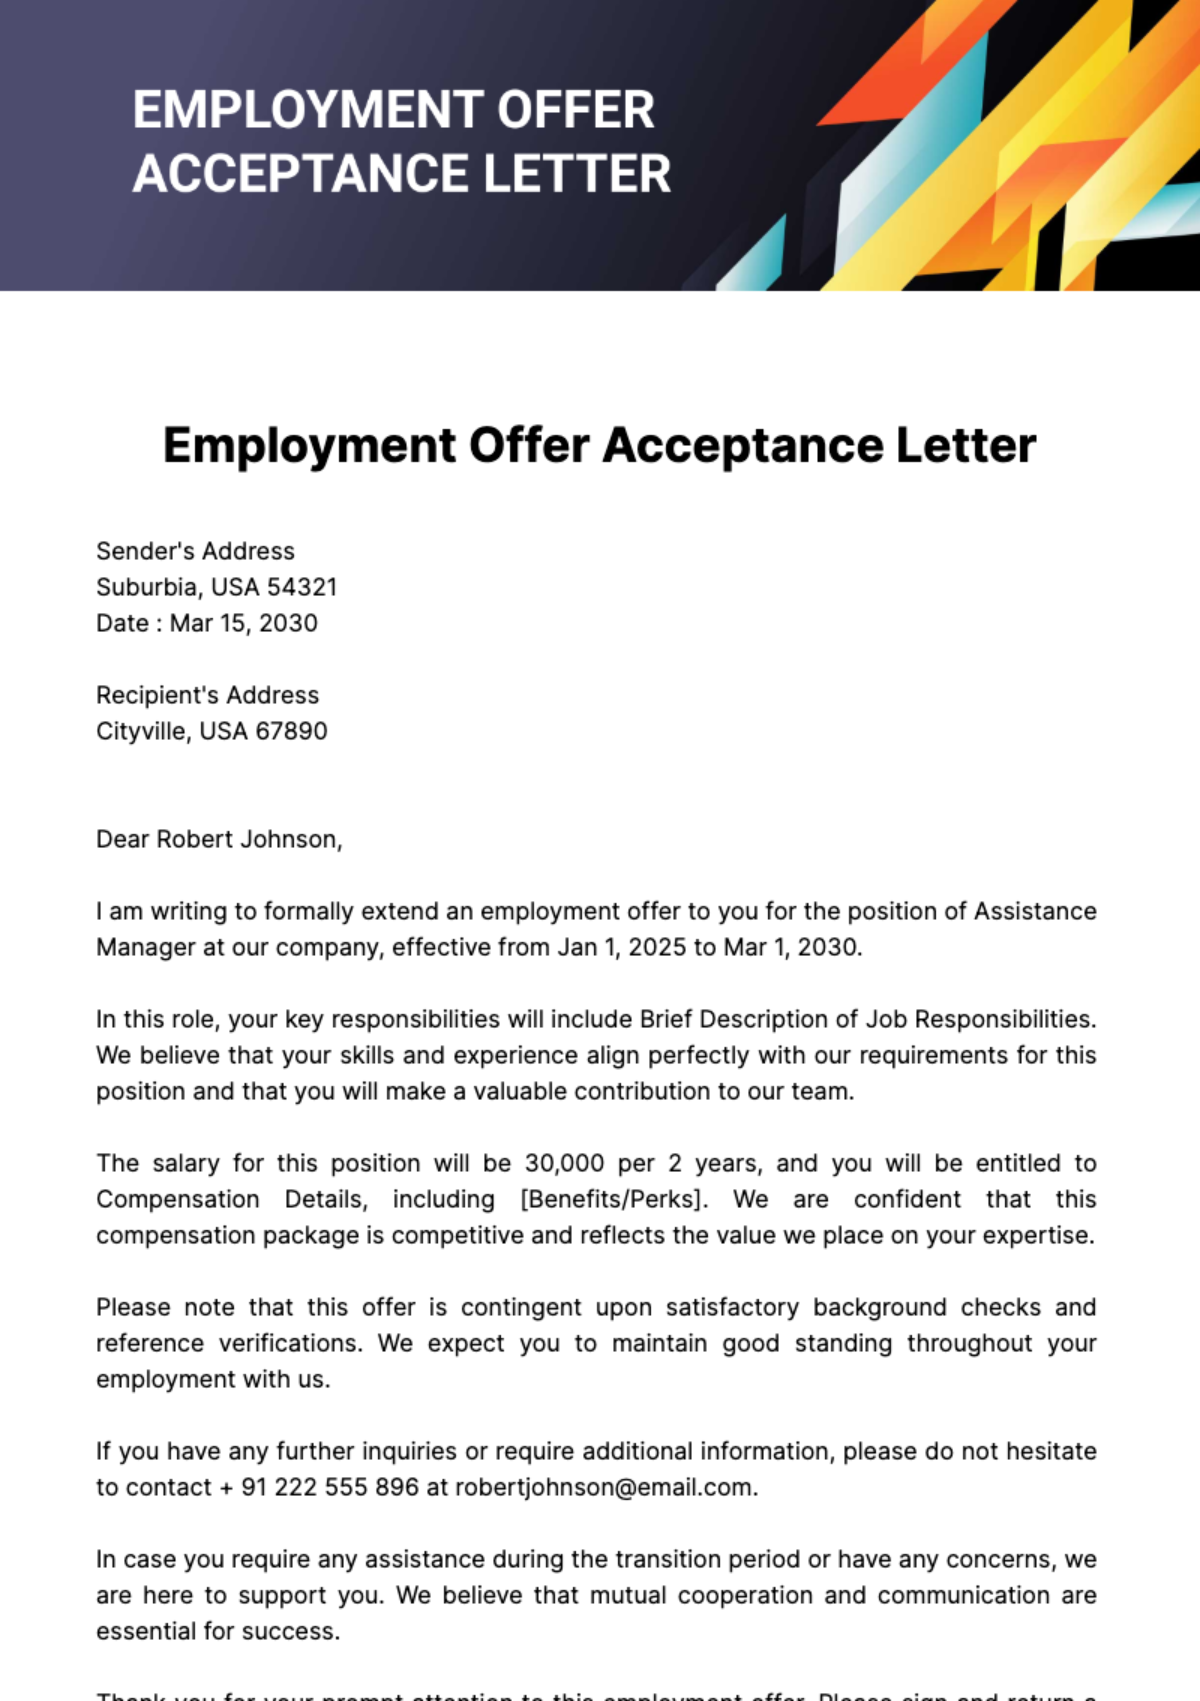 Free Employment Offer Acceptance Letter Template